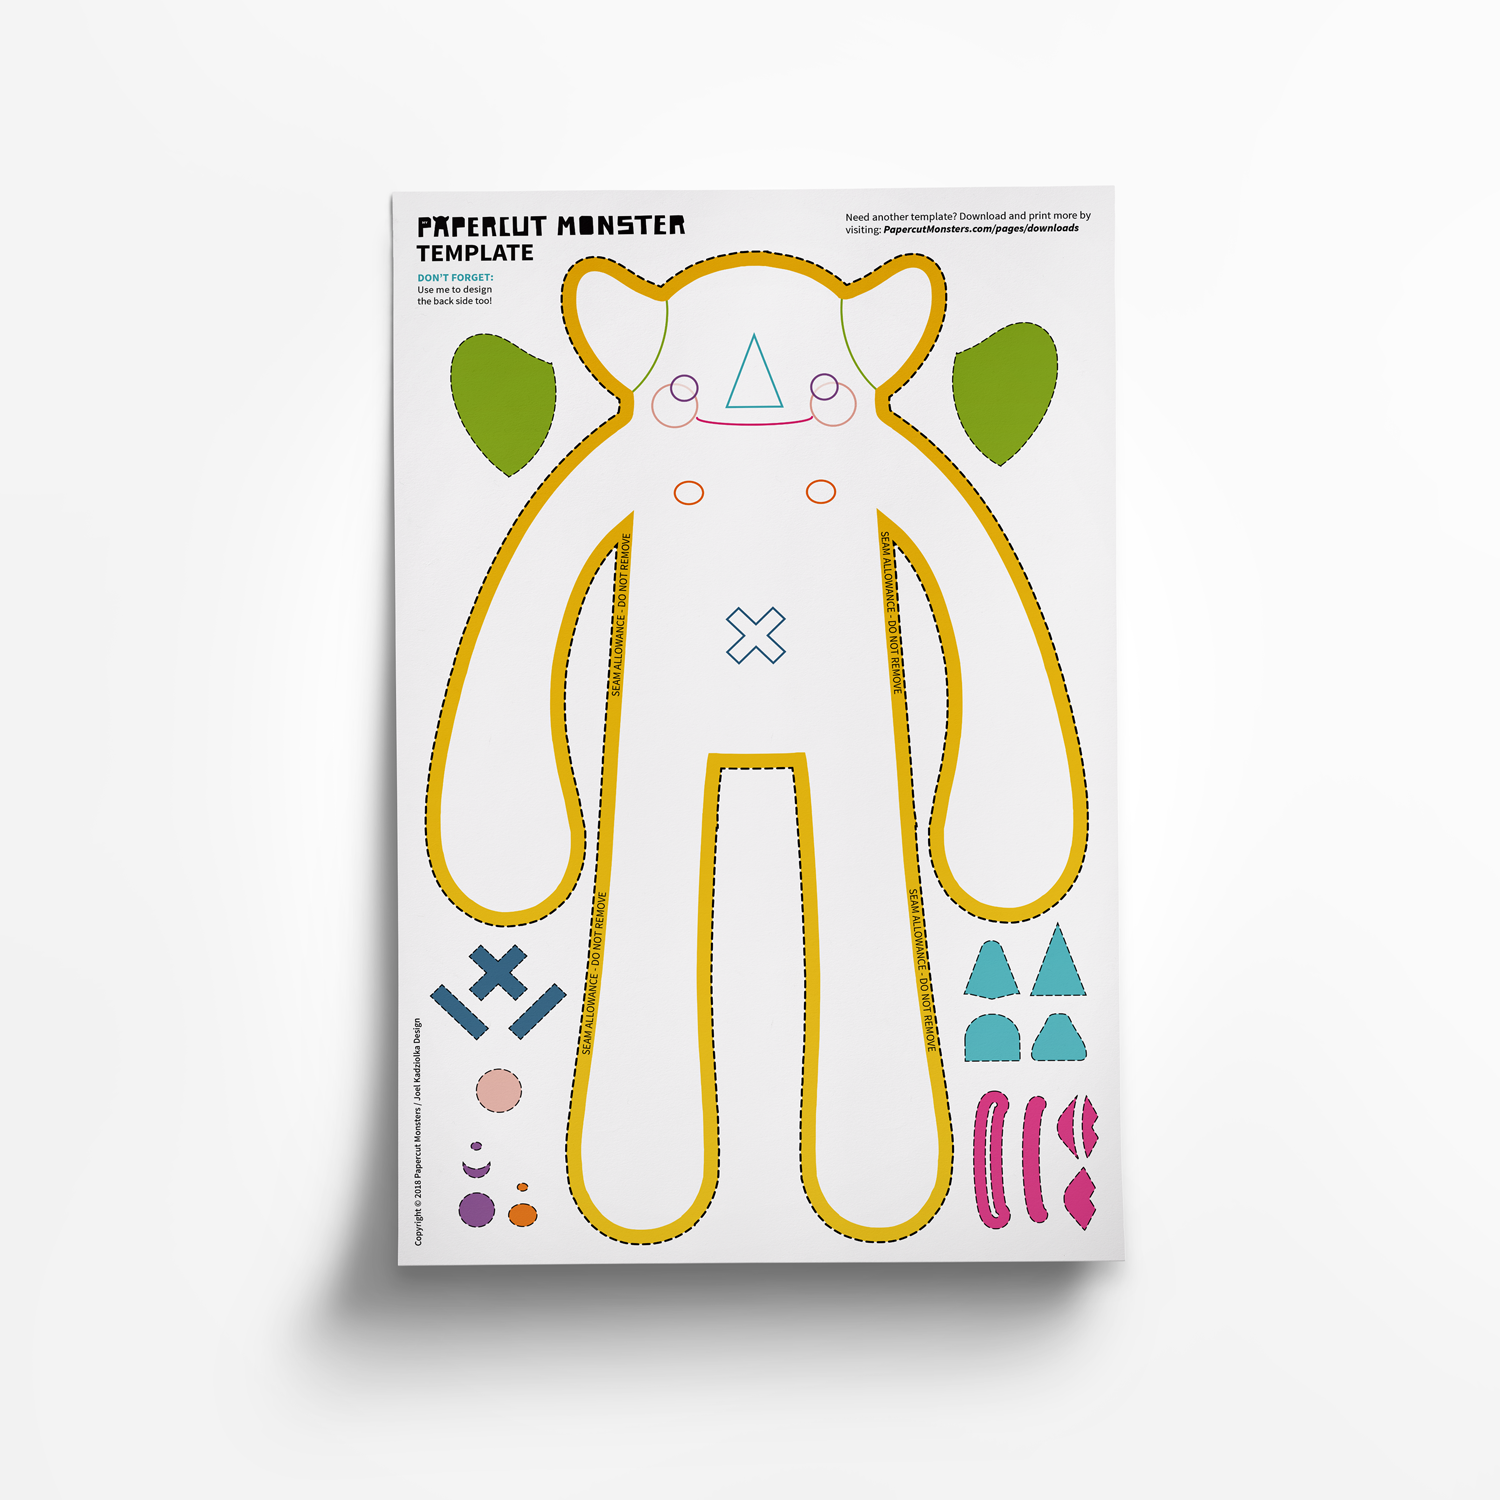 Free Collage Template - Download and Print - Papercut Monsters - Handmade Stuffed Toy 